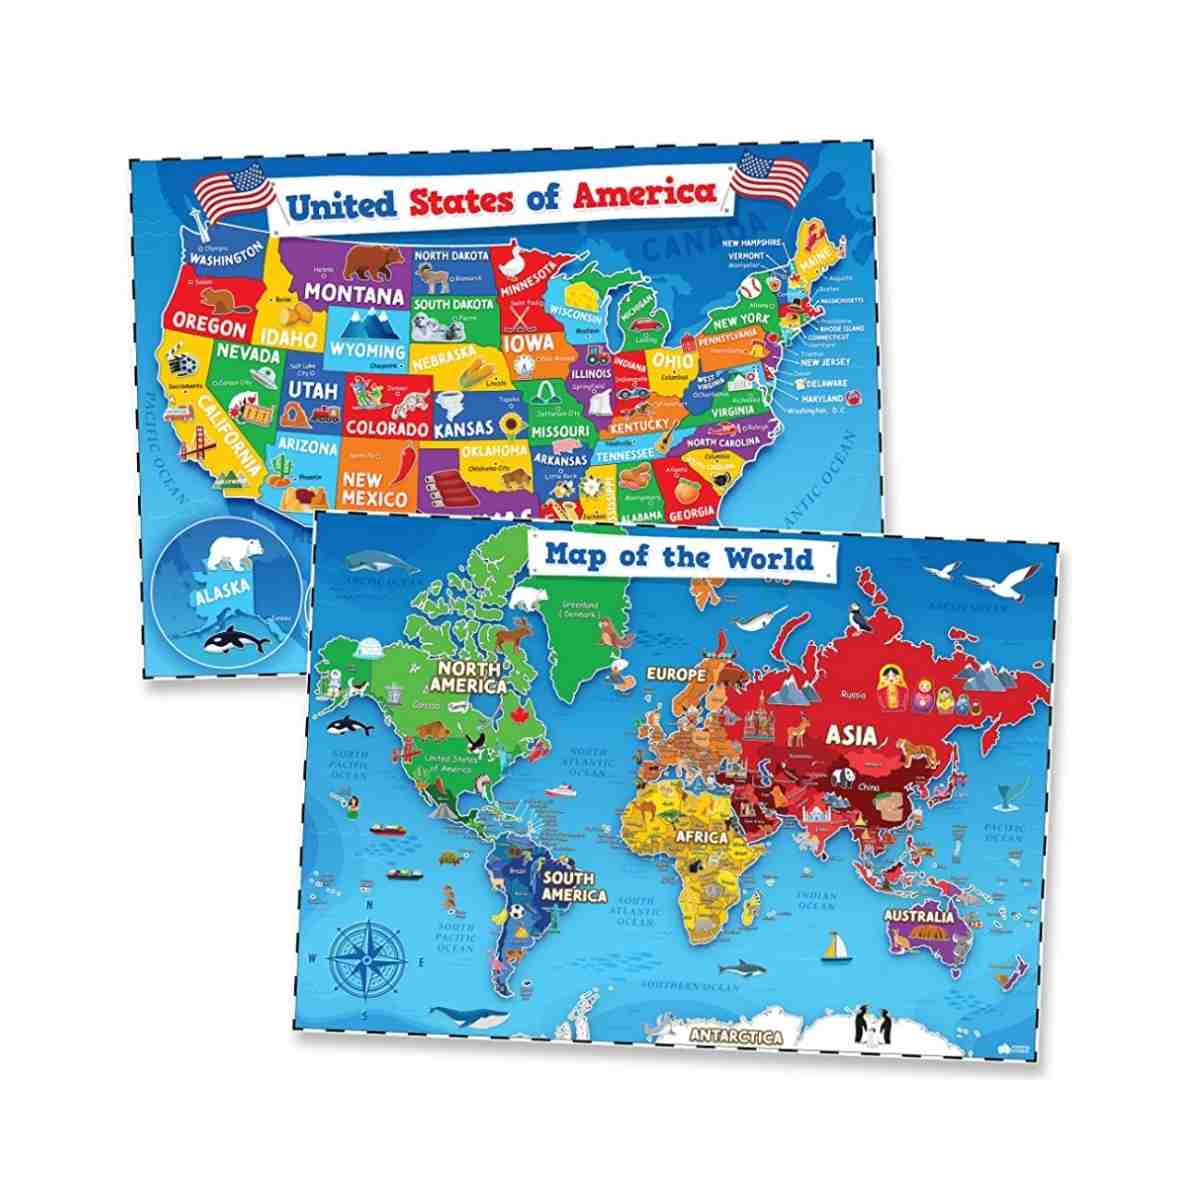 United States & World Map Poster